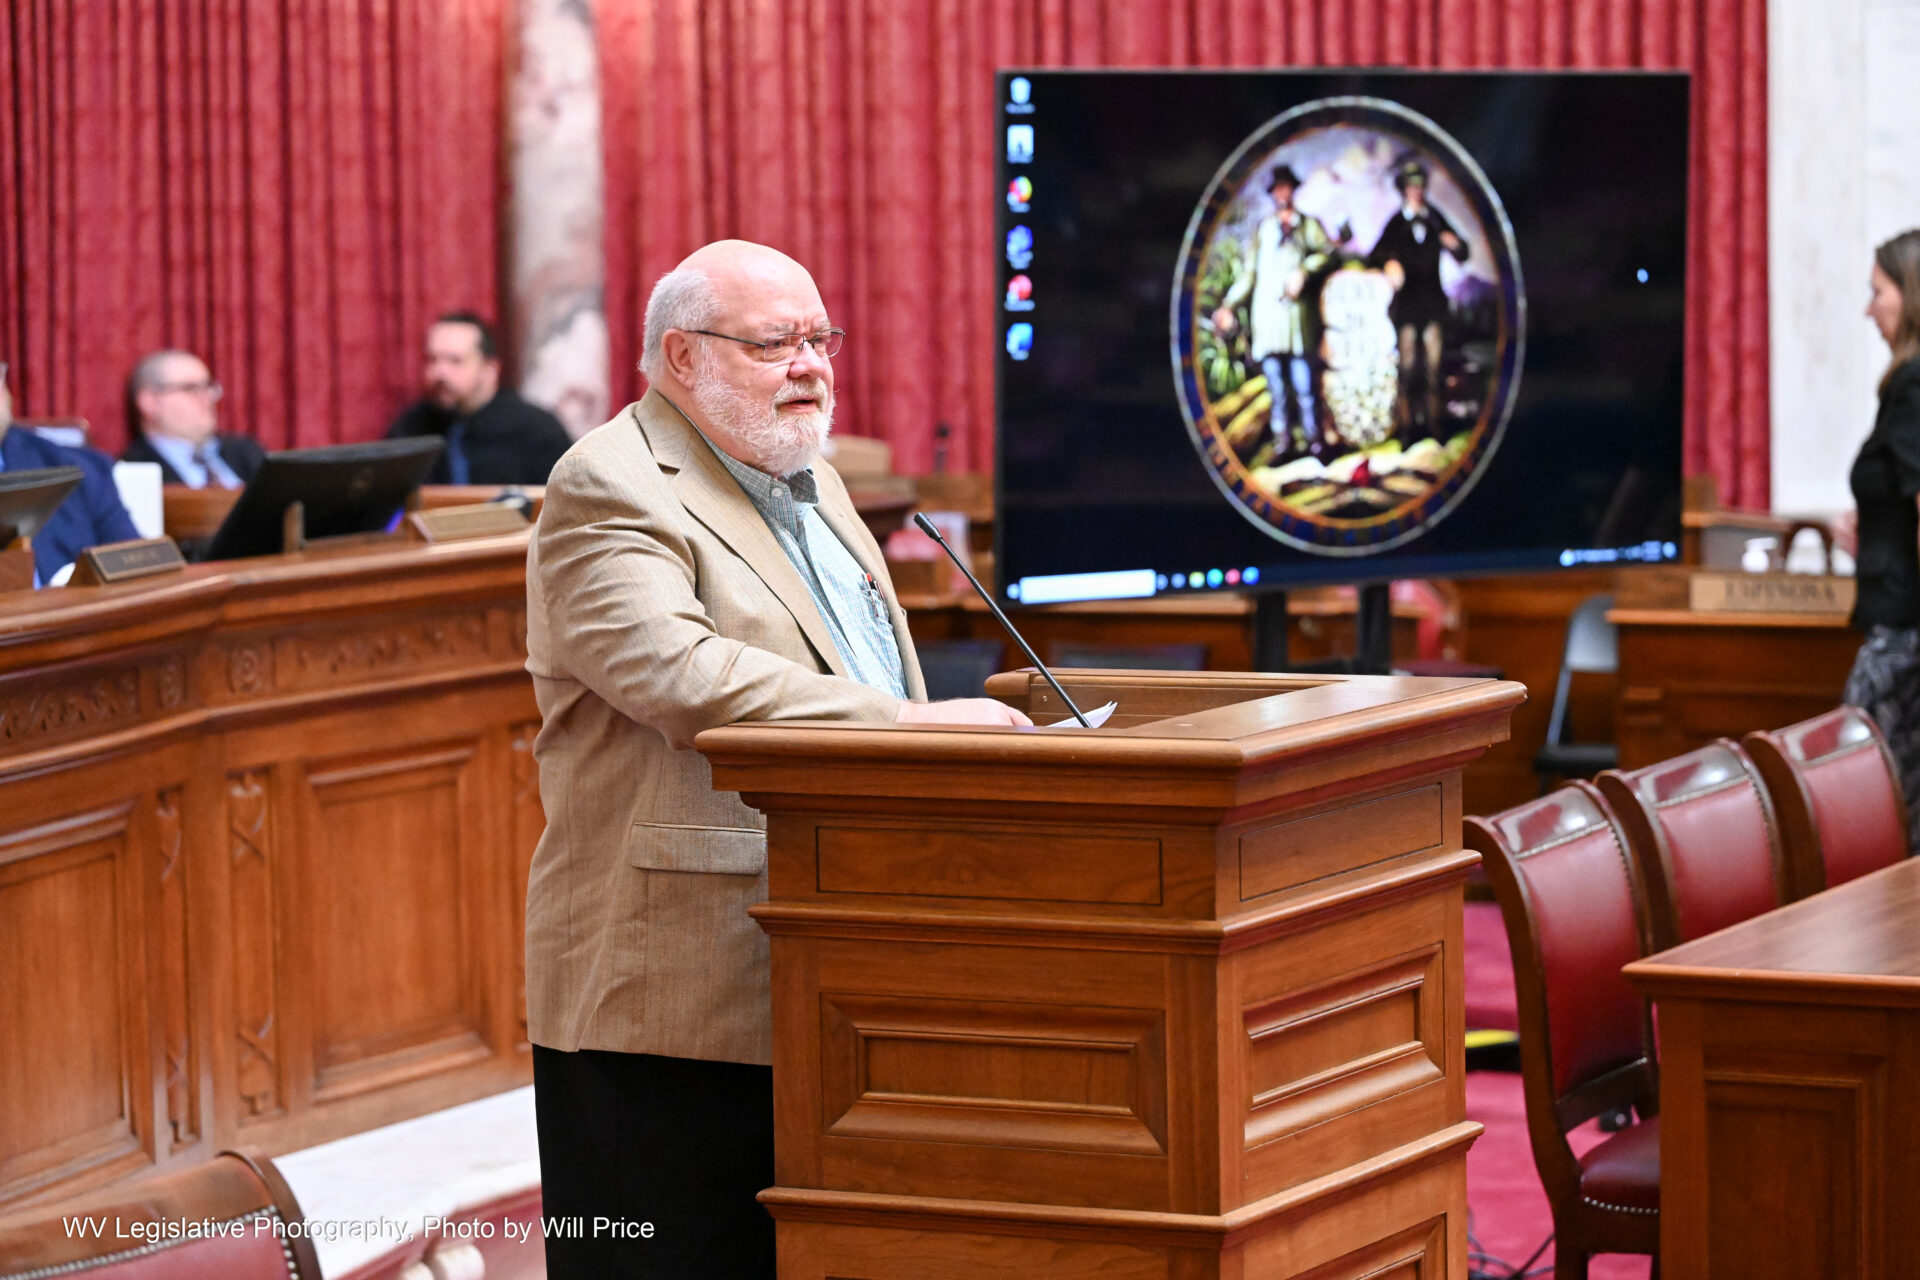 A man with white hair and beard stands at a lectern in front of empty desks. Behind him to the right can be seen a flatscreen TV displaying a stylized state seal. On his other side can be seen a podium and red curtains against the wall.